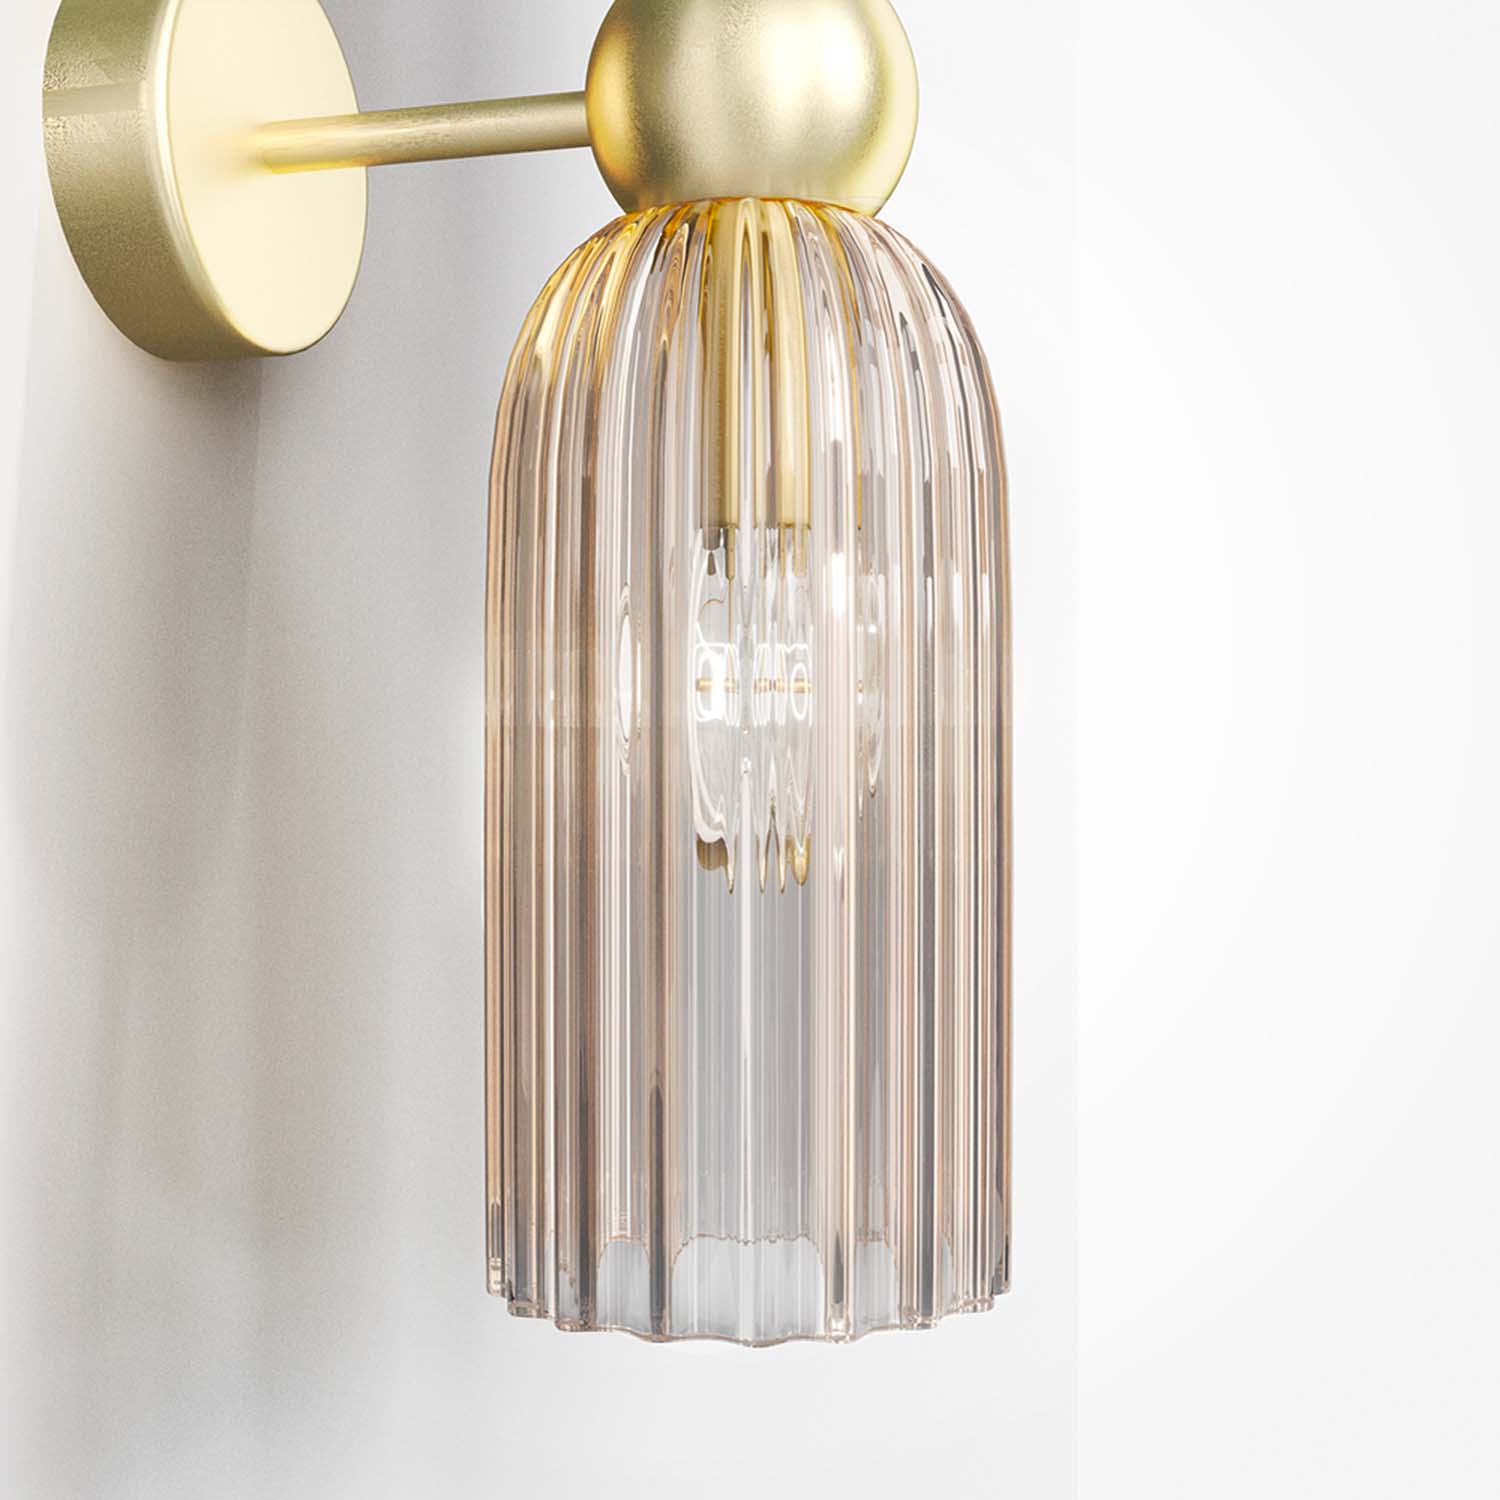 ANTIC - Vintage art deco style glass wall light